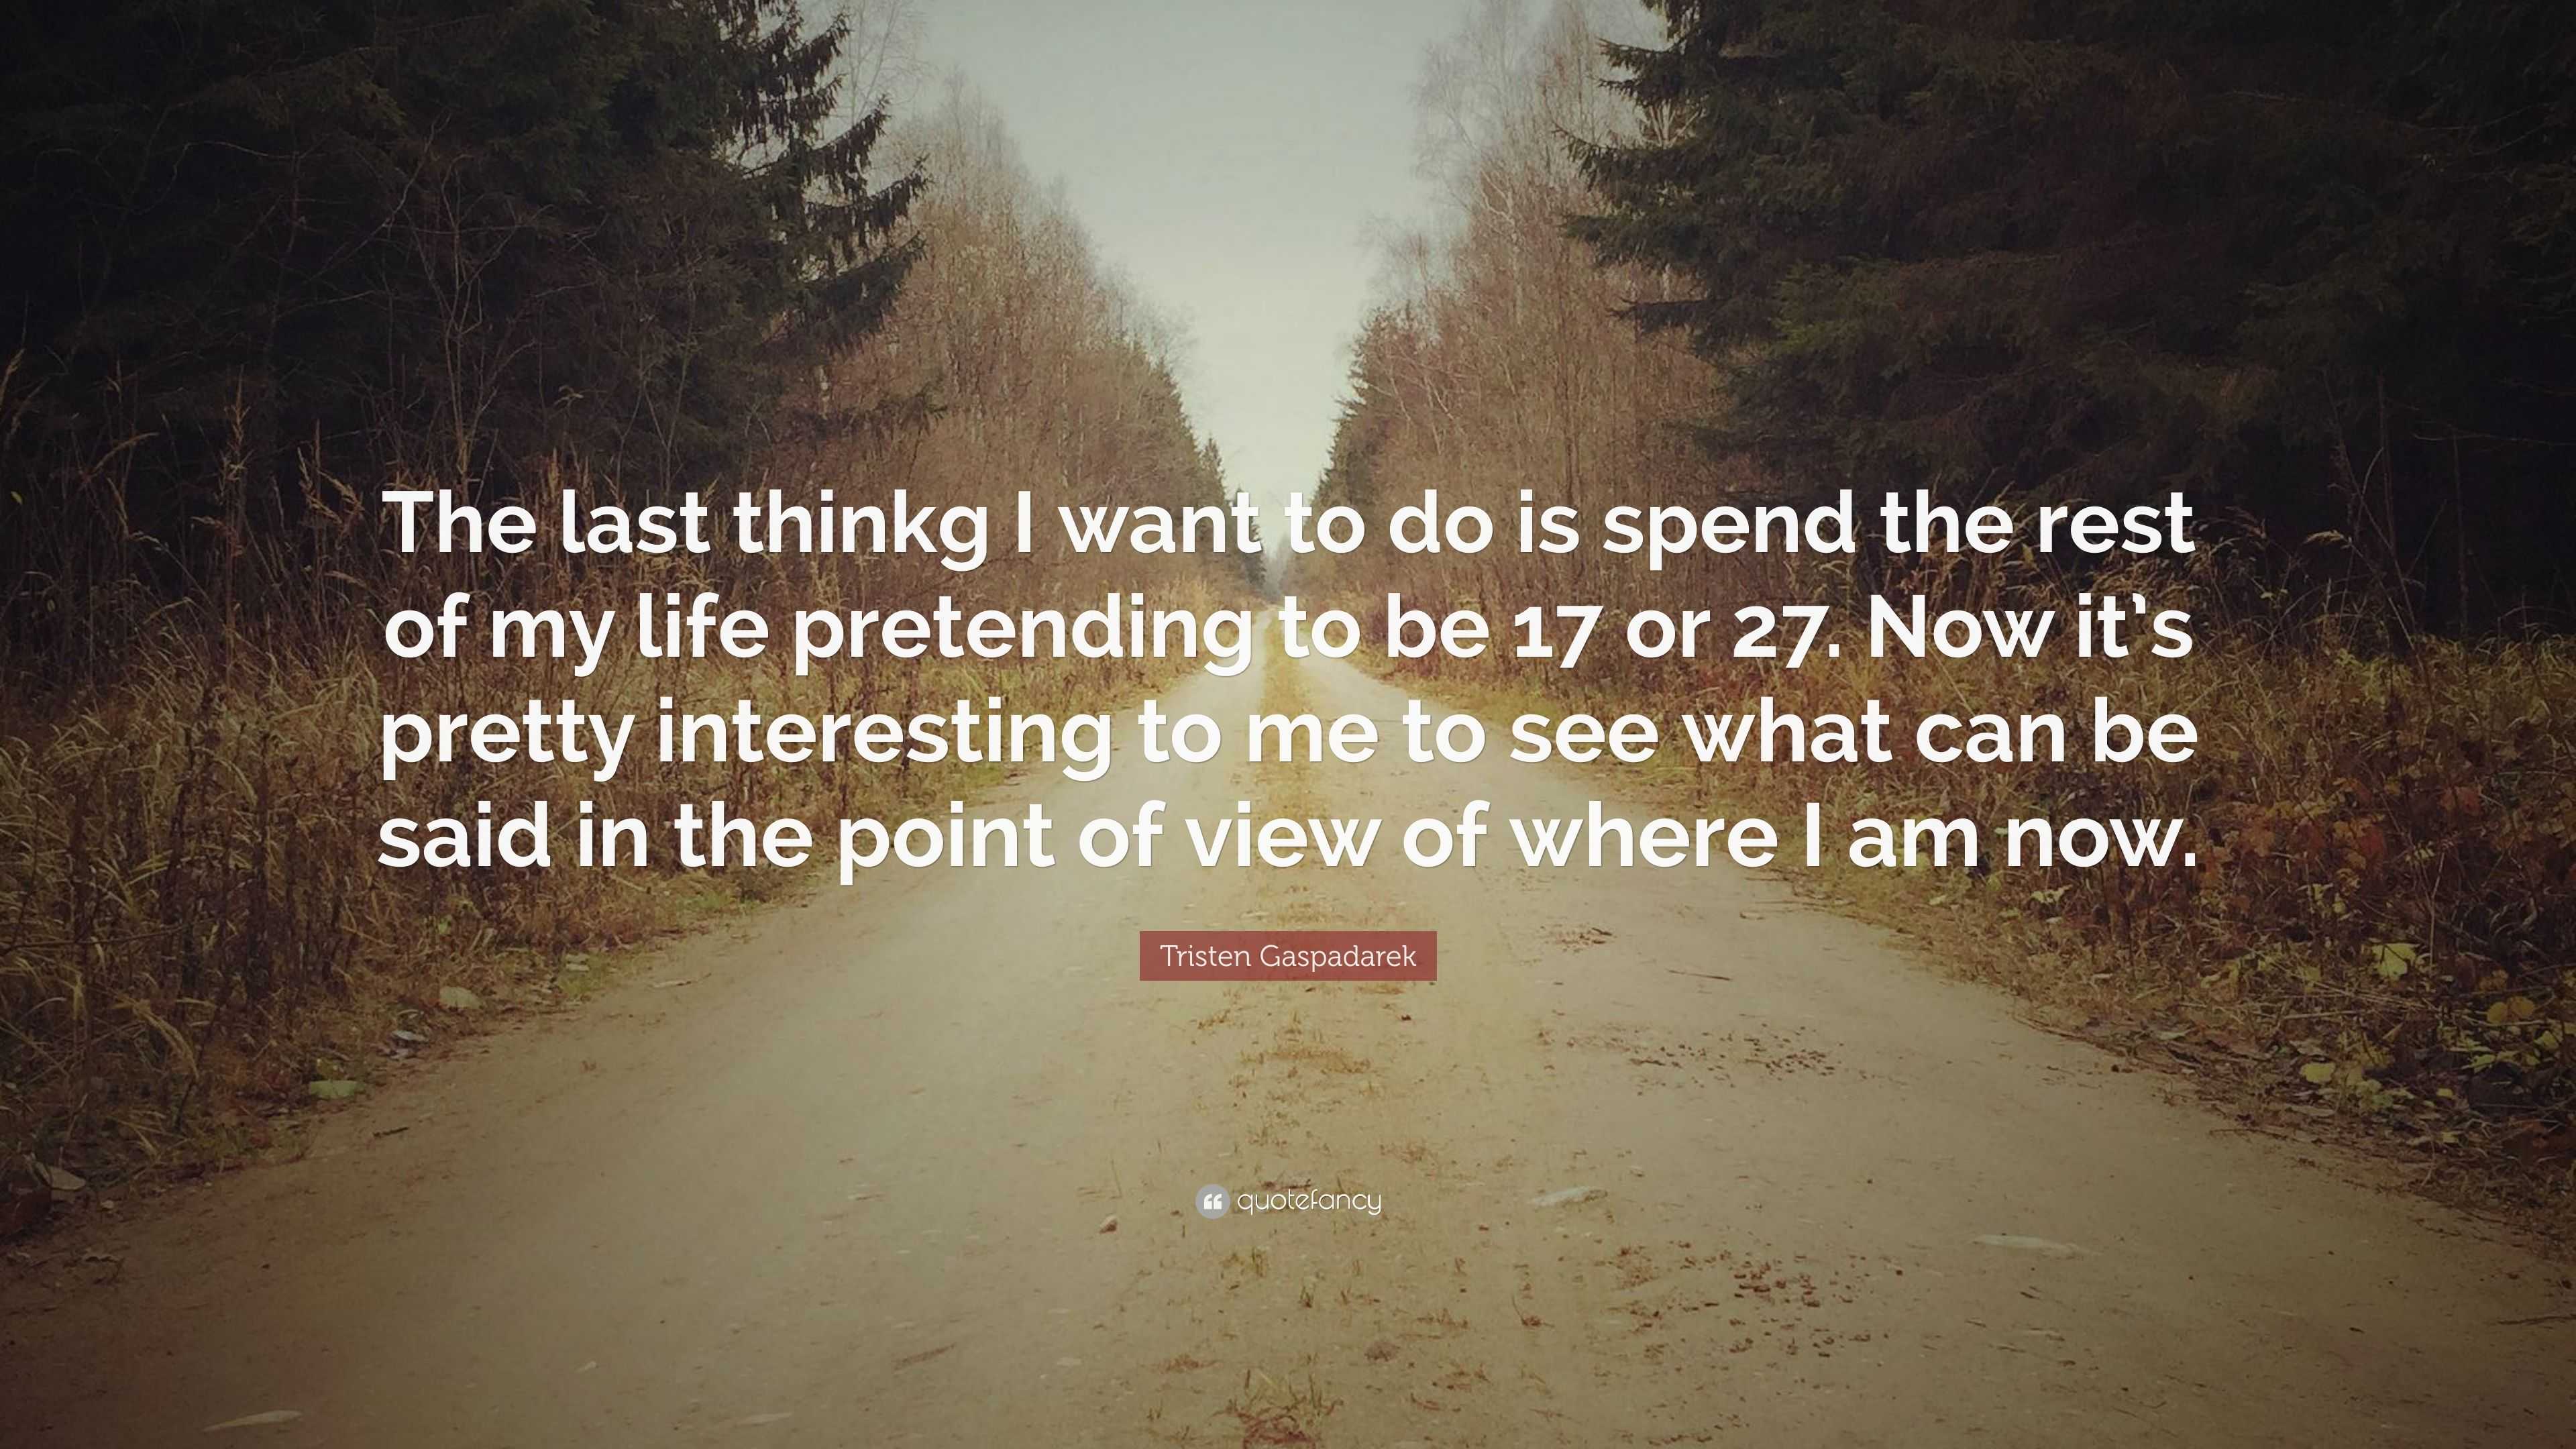 Tristen Gaspadarek Quote: “The last thinkg I want to do is spend the ...